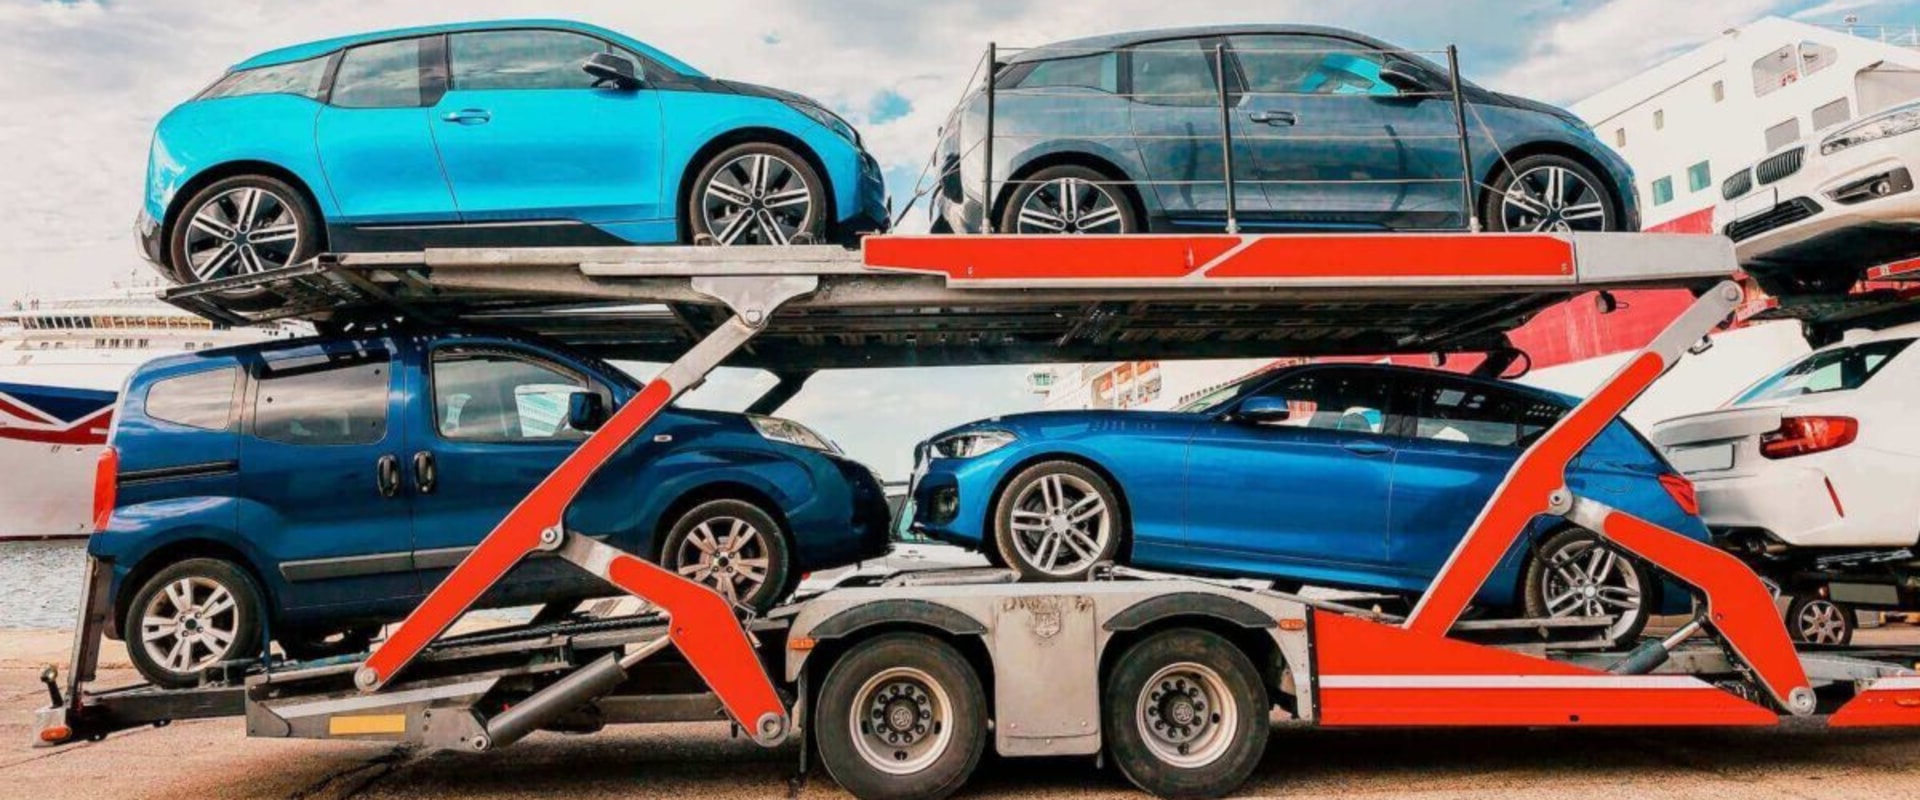 Car Shipping Cost in Houston: Size & Weight Matters